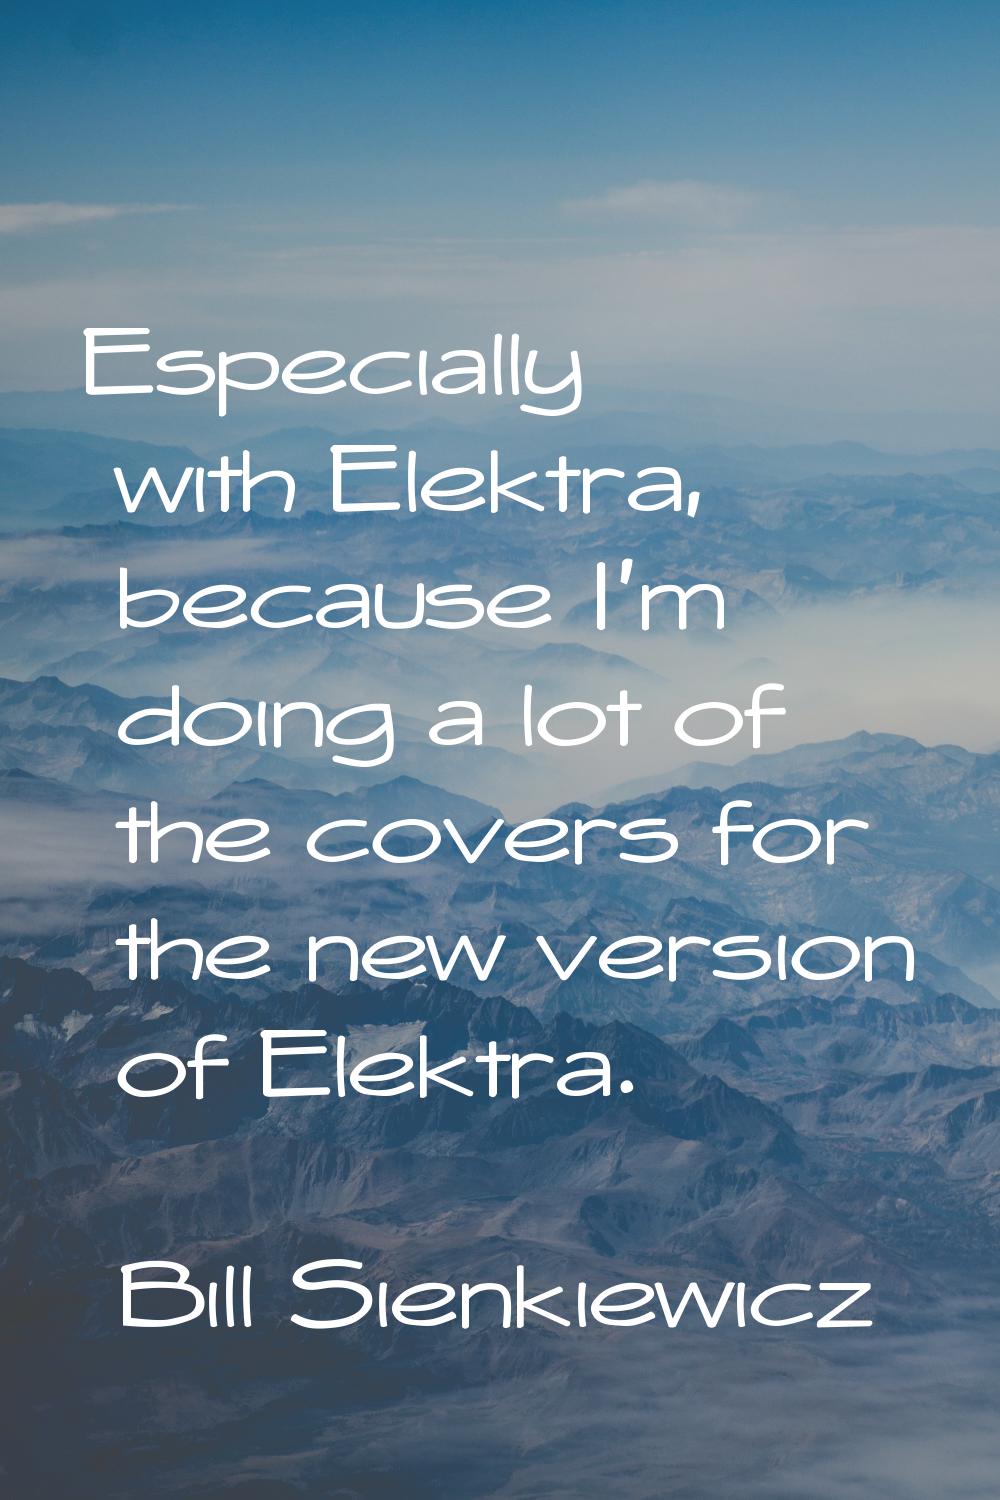 Especially with Elektra, because I'm doing a lot of the covers for the new version of Elektra.